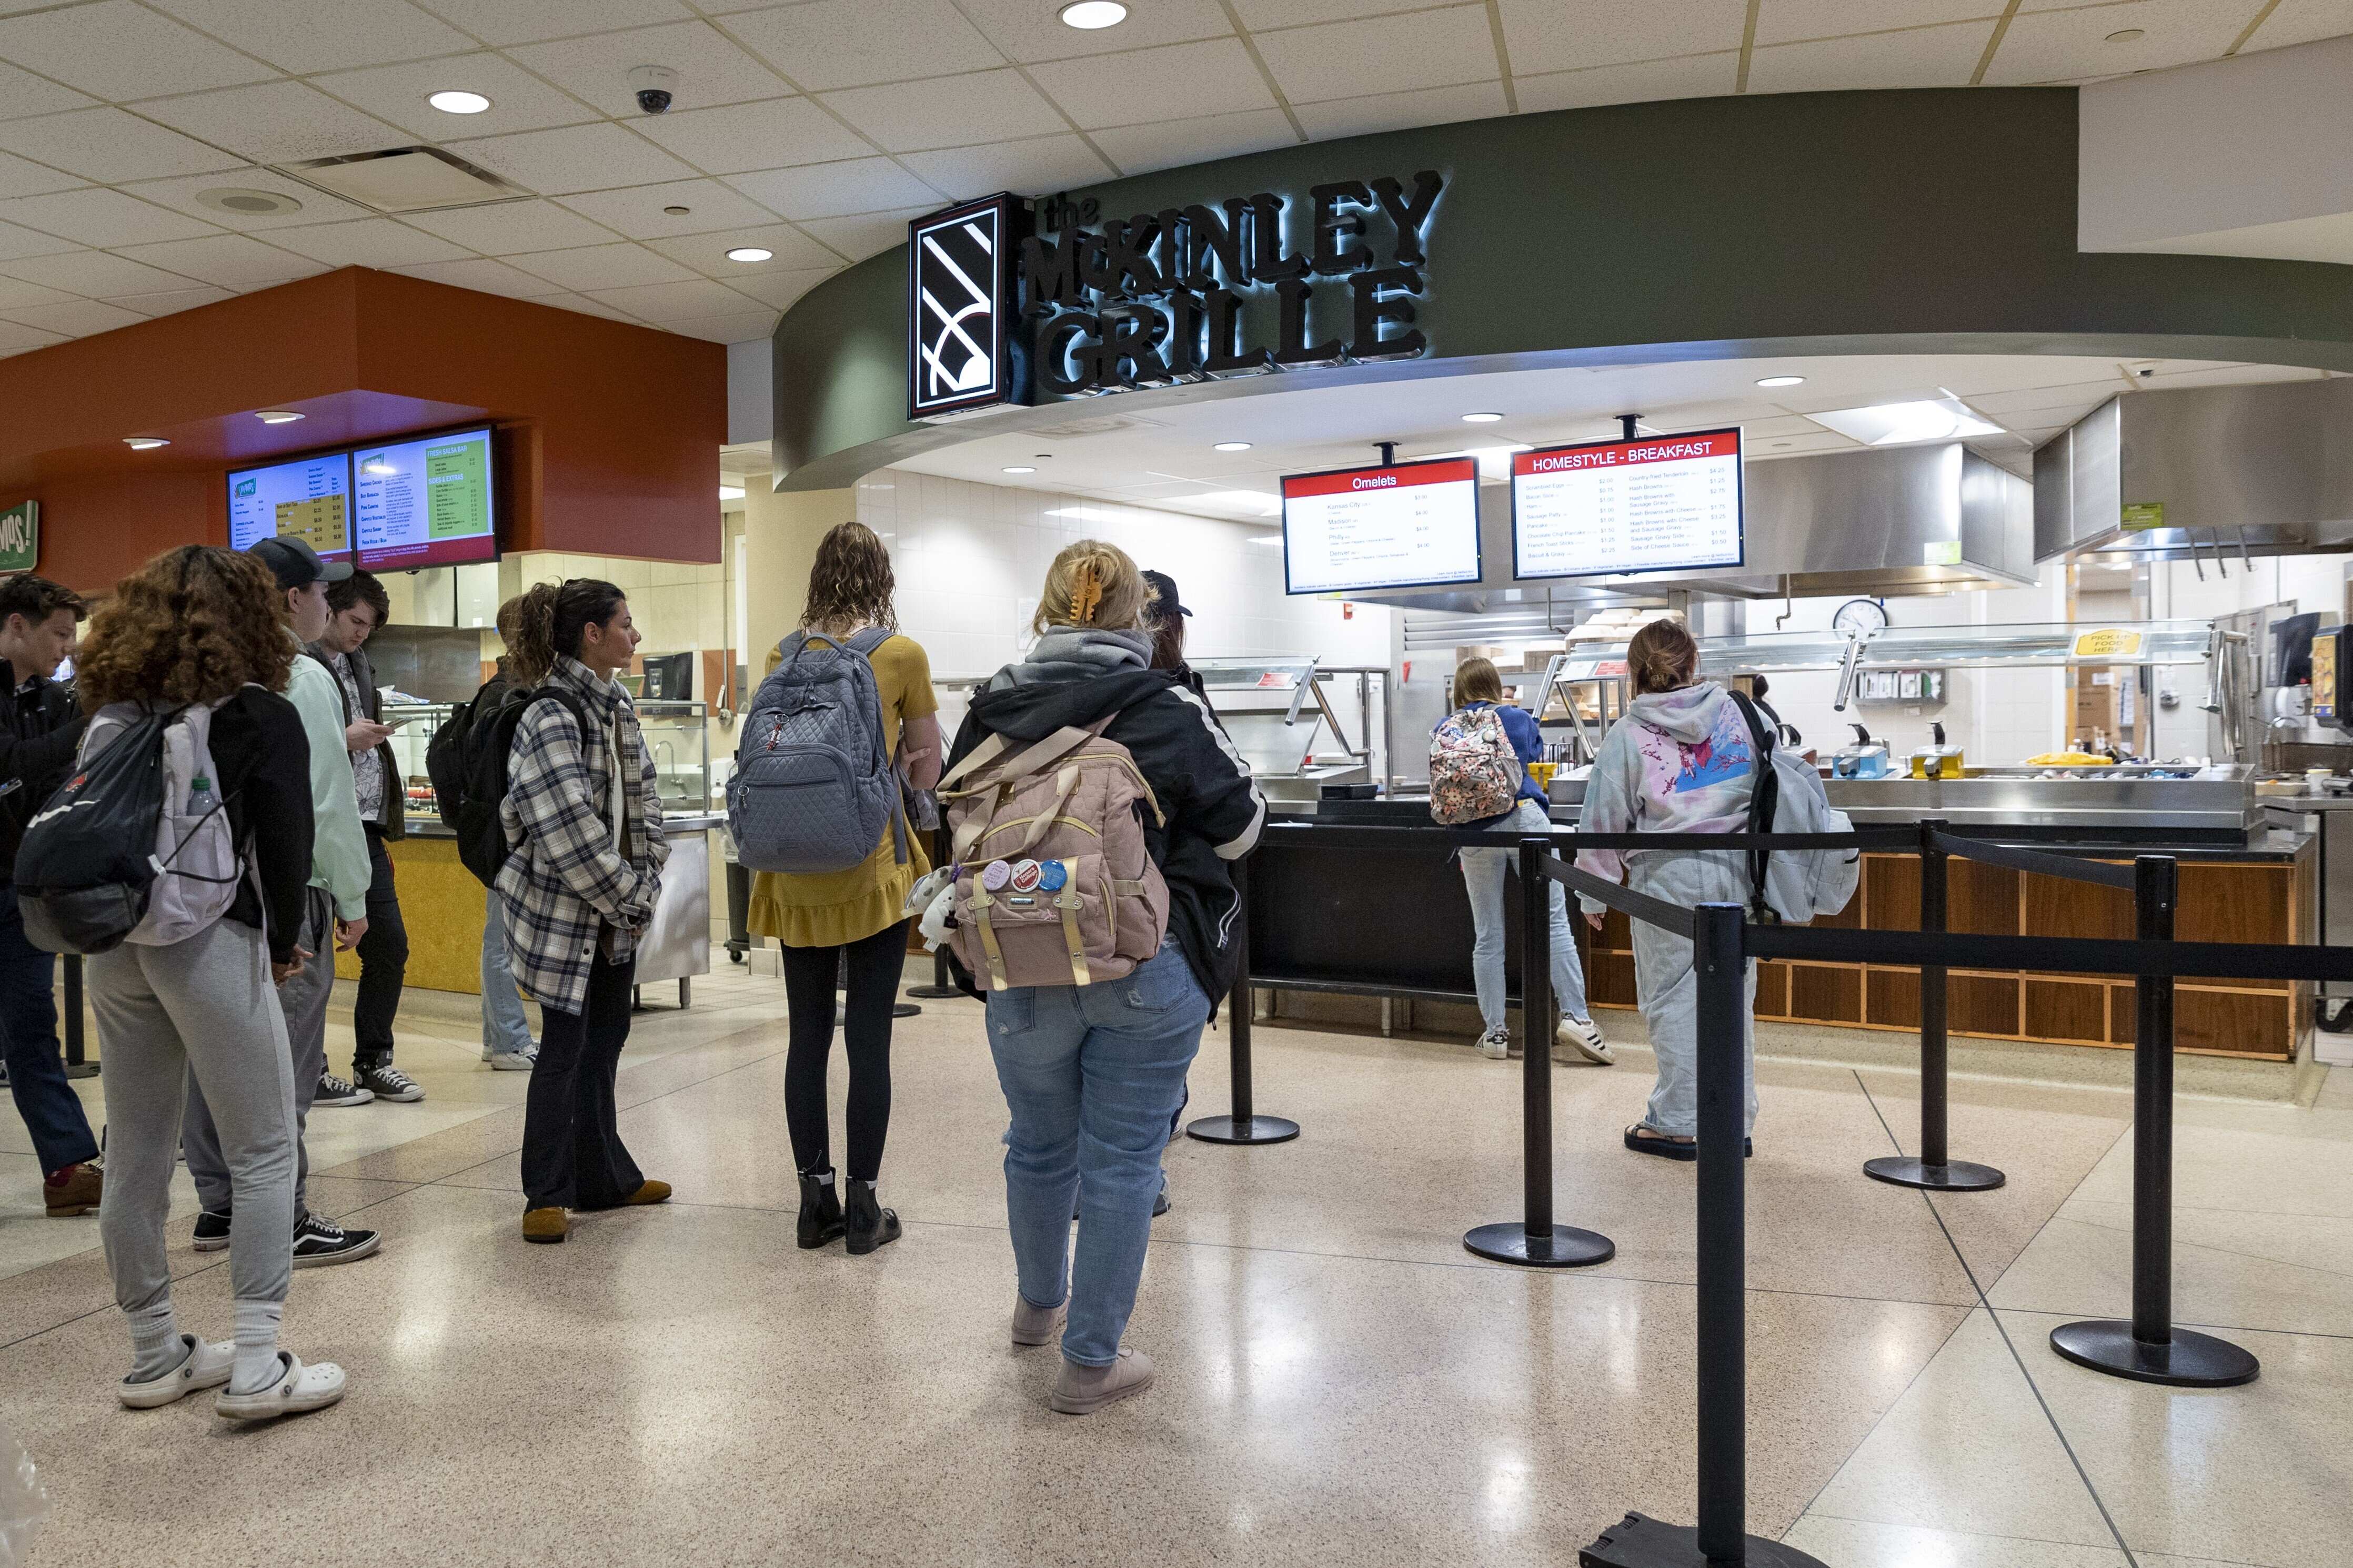 McKinley grill in the Atrium located inside the Arts and Journalism building